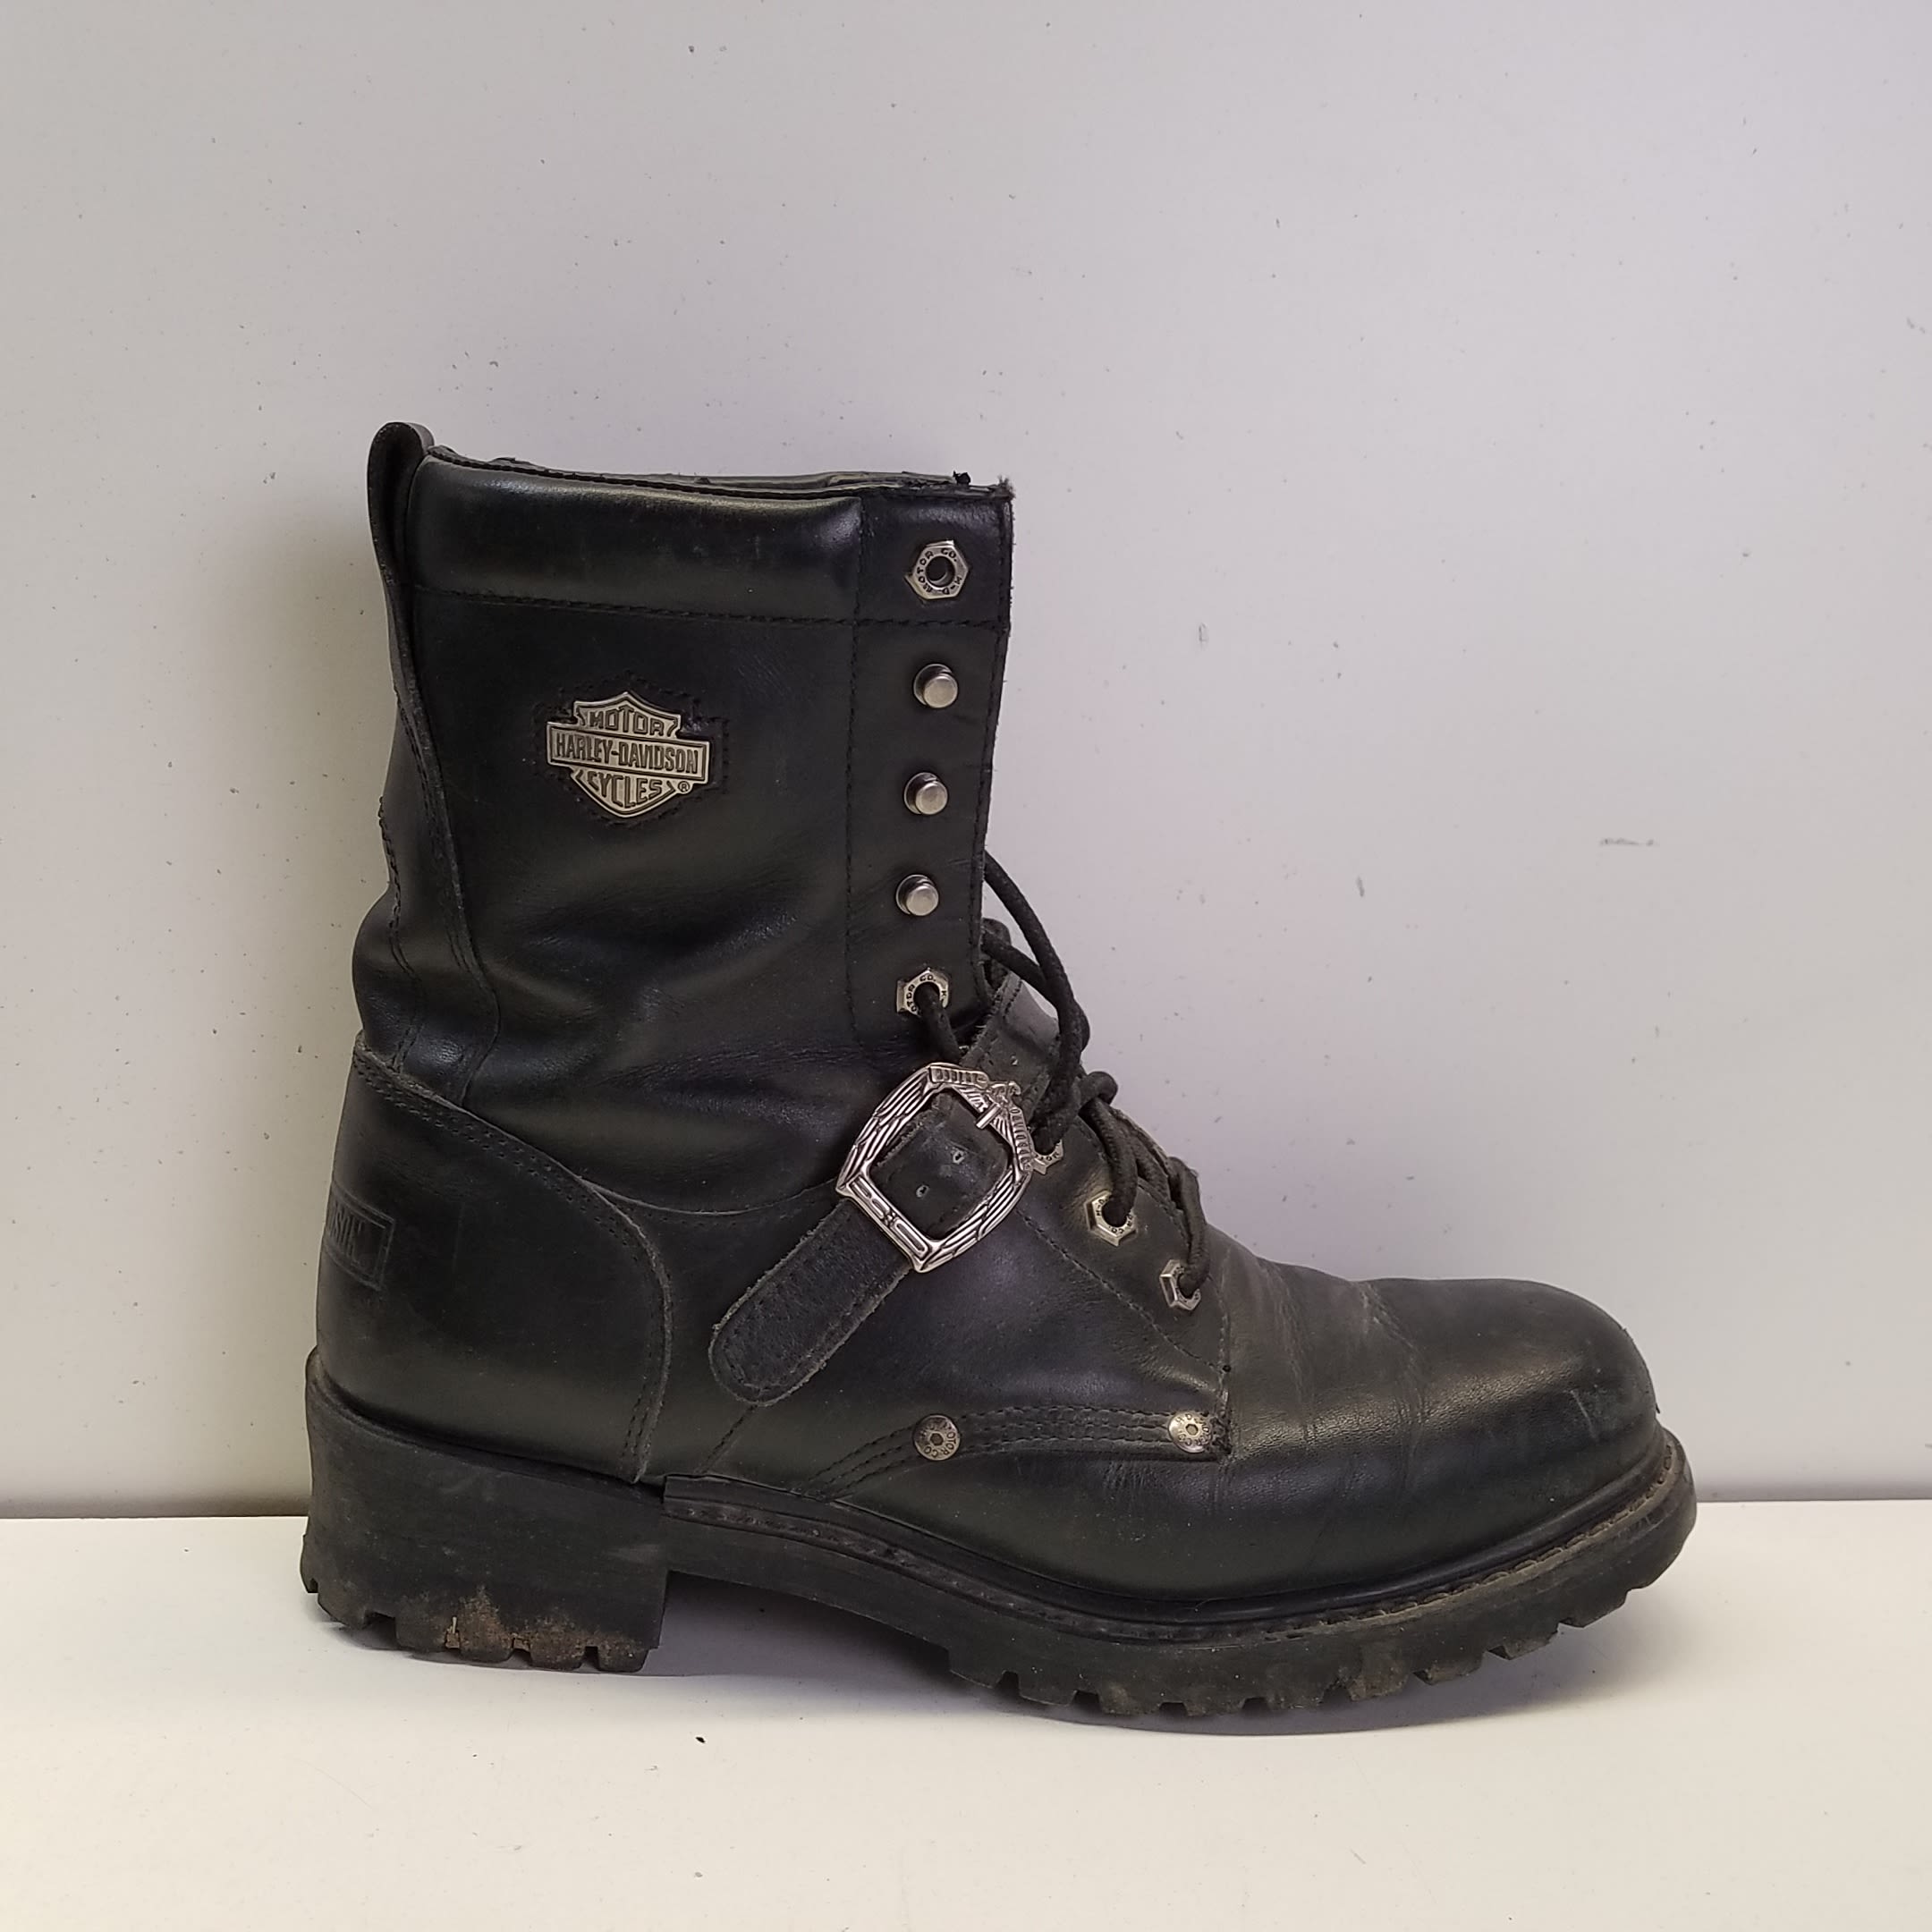 Buy the Harley Davidson Leather Faded Glory Motorcycle Boots Black